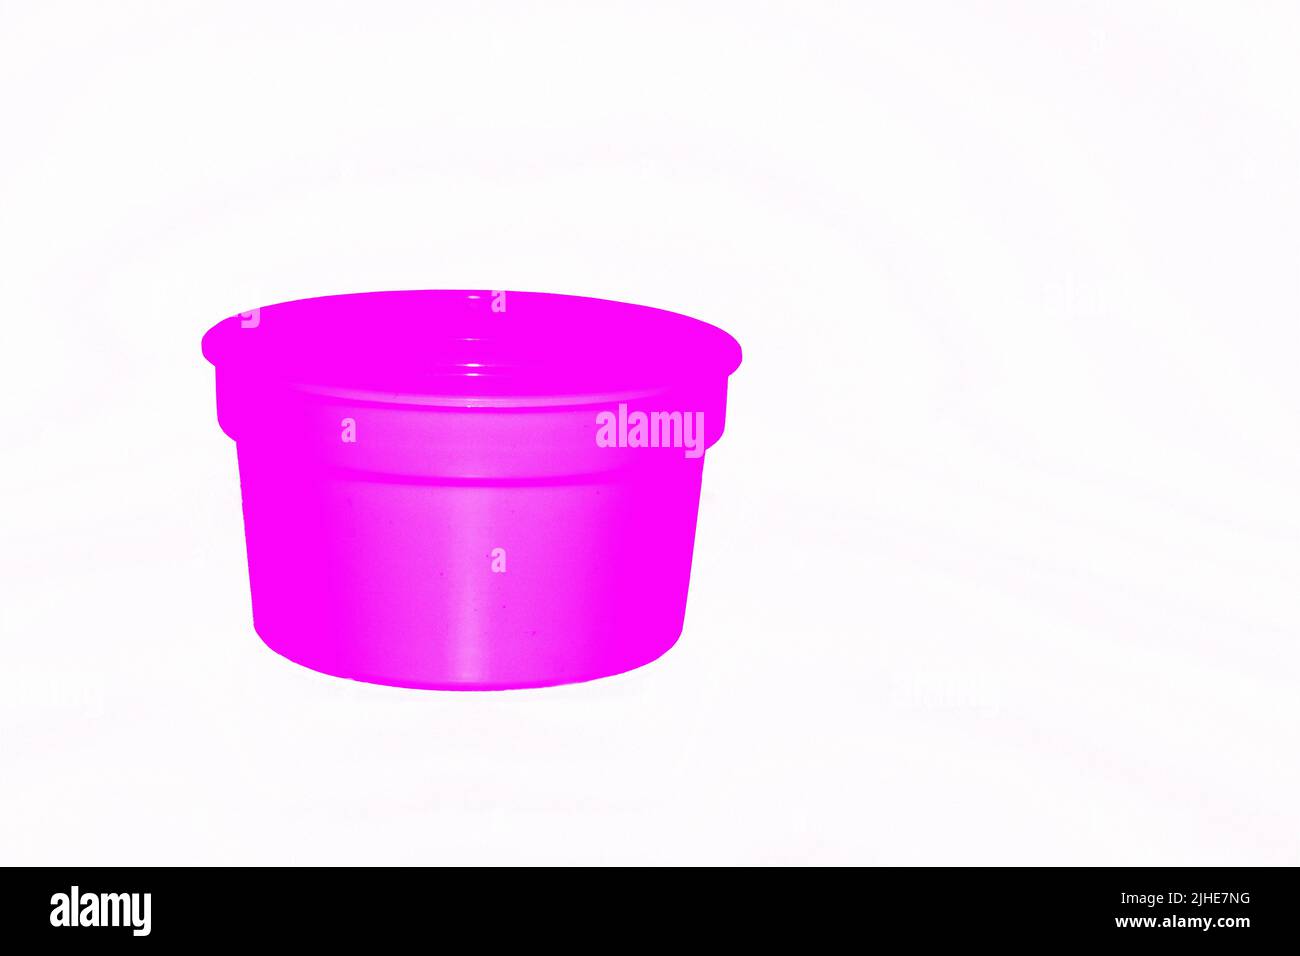 https://c8.alamy.com/comp/2JHE7NG/delicate-pink-purple-plastic-jar-capacity-of-isolated-on-white-2JHE7NG.jpg